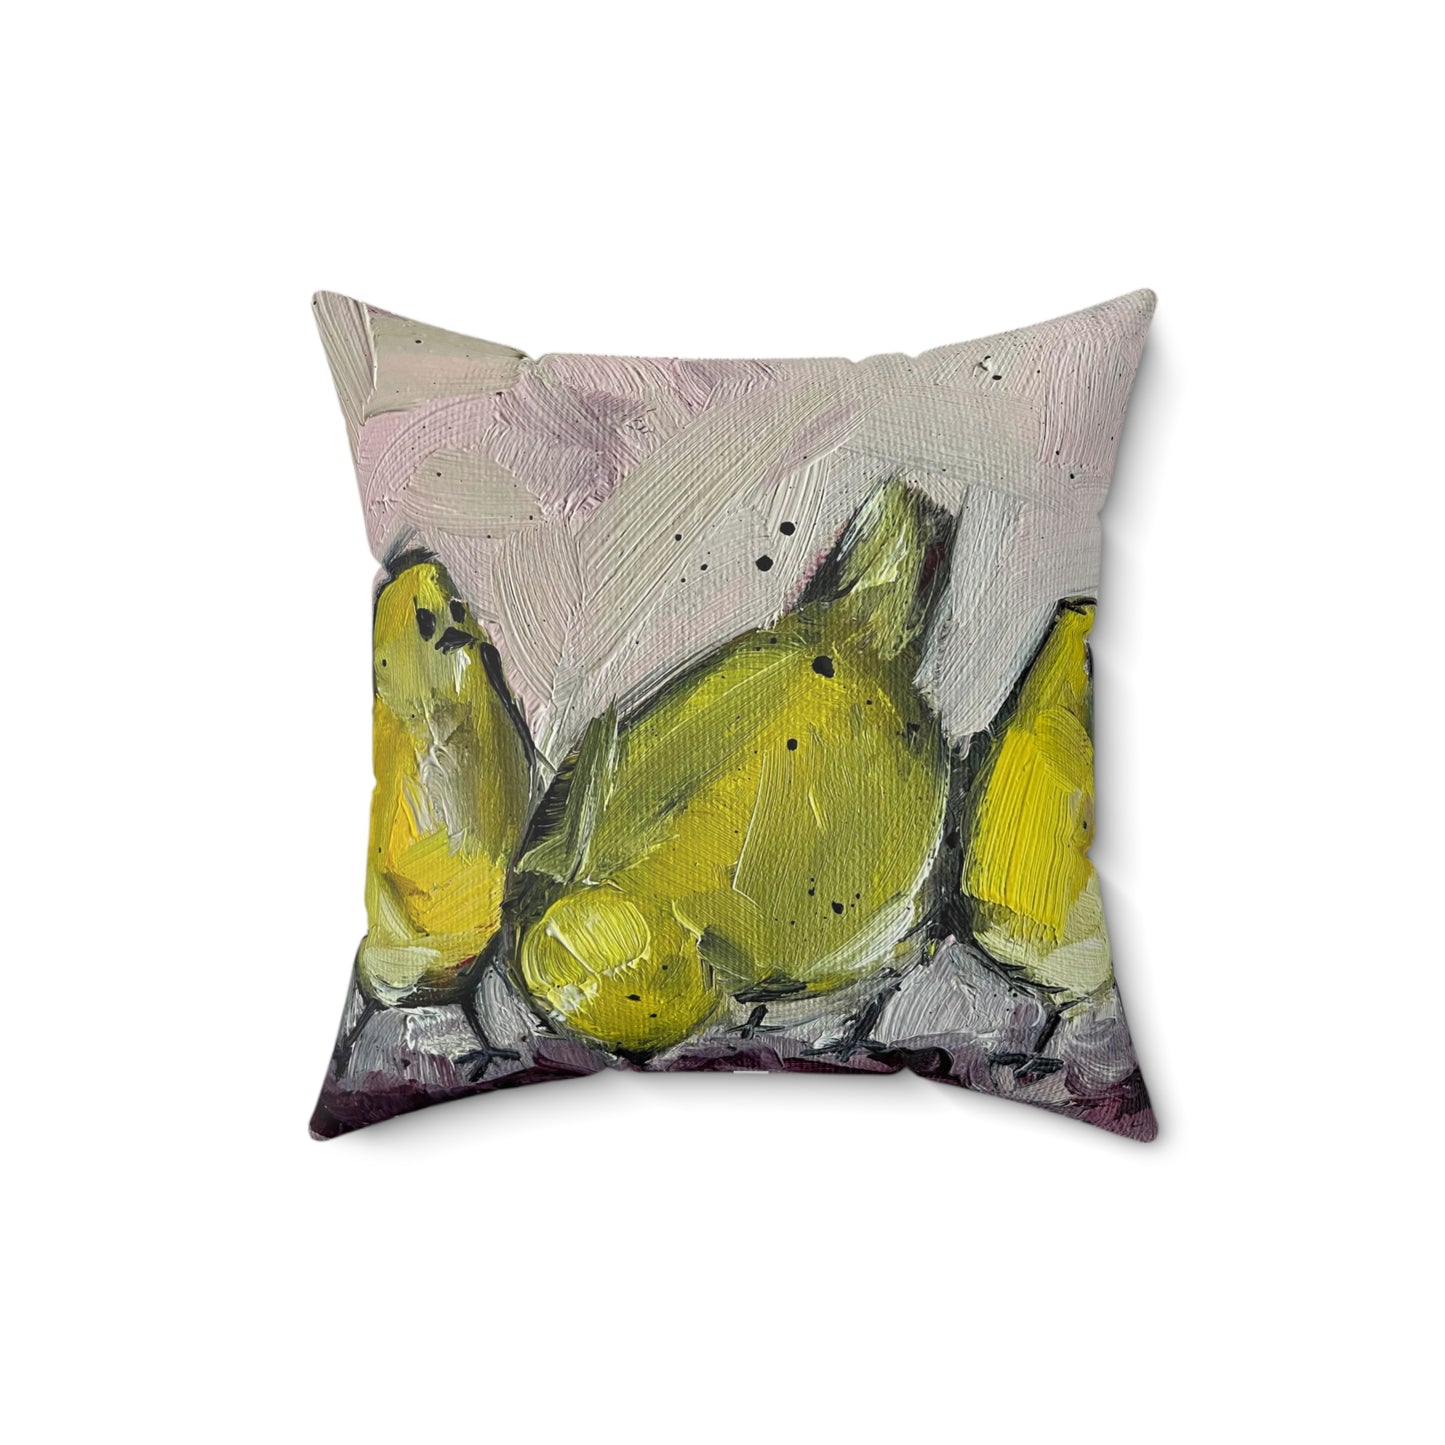 Three Cute Yellow Chicks Indoor Spun Polyester Square Pillow